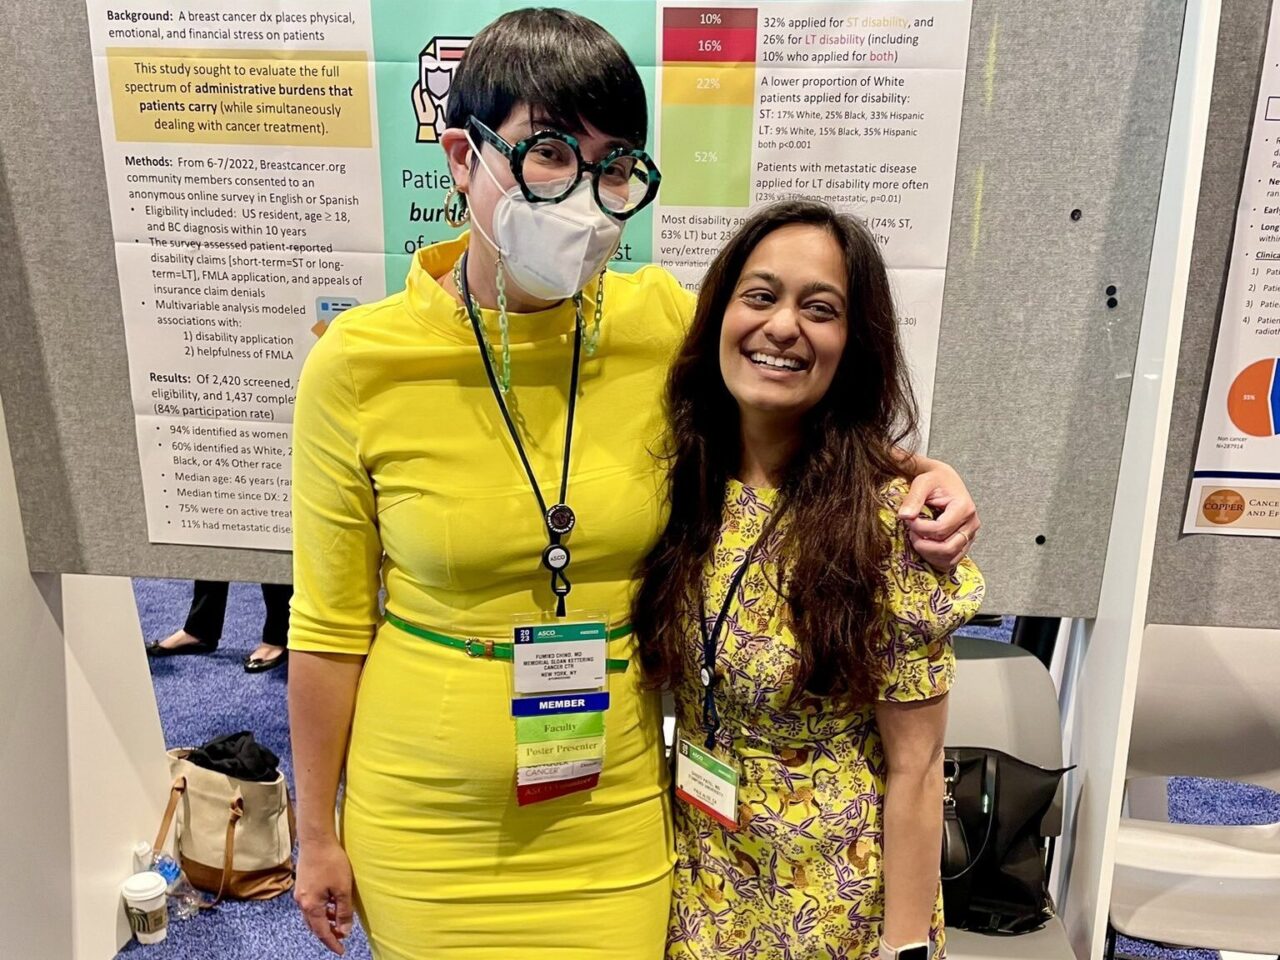 Fumiko Ladd Chino: It’s the 2nd annual Yellow Dress Challenge for ASCO24